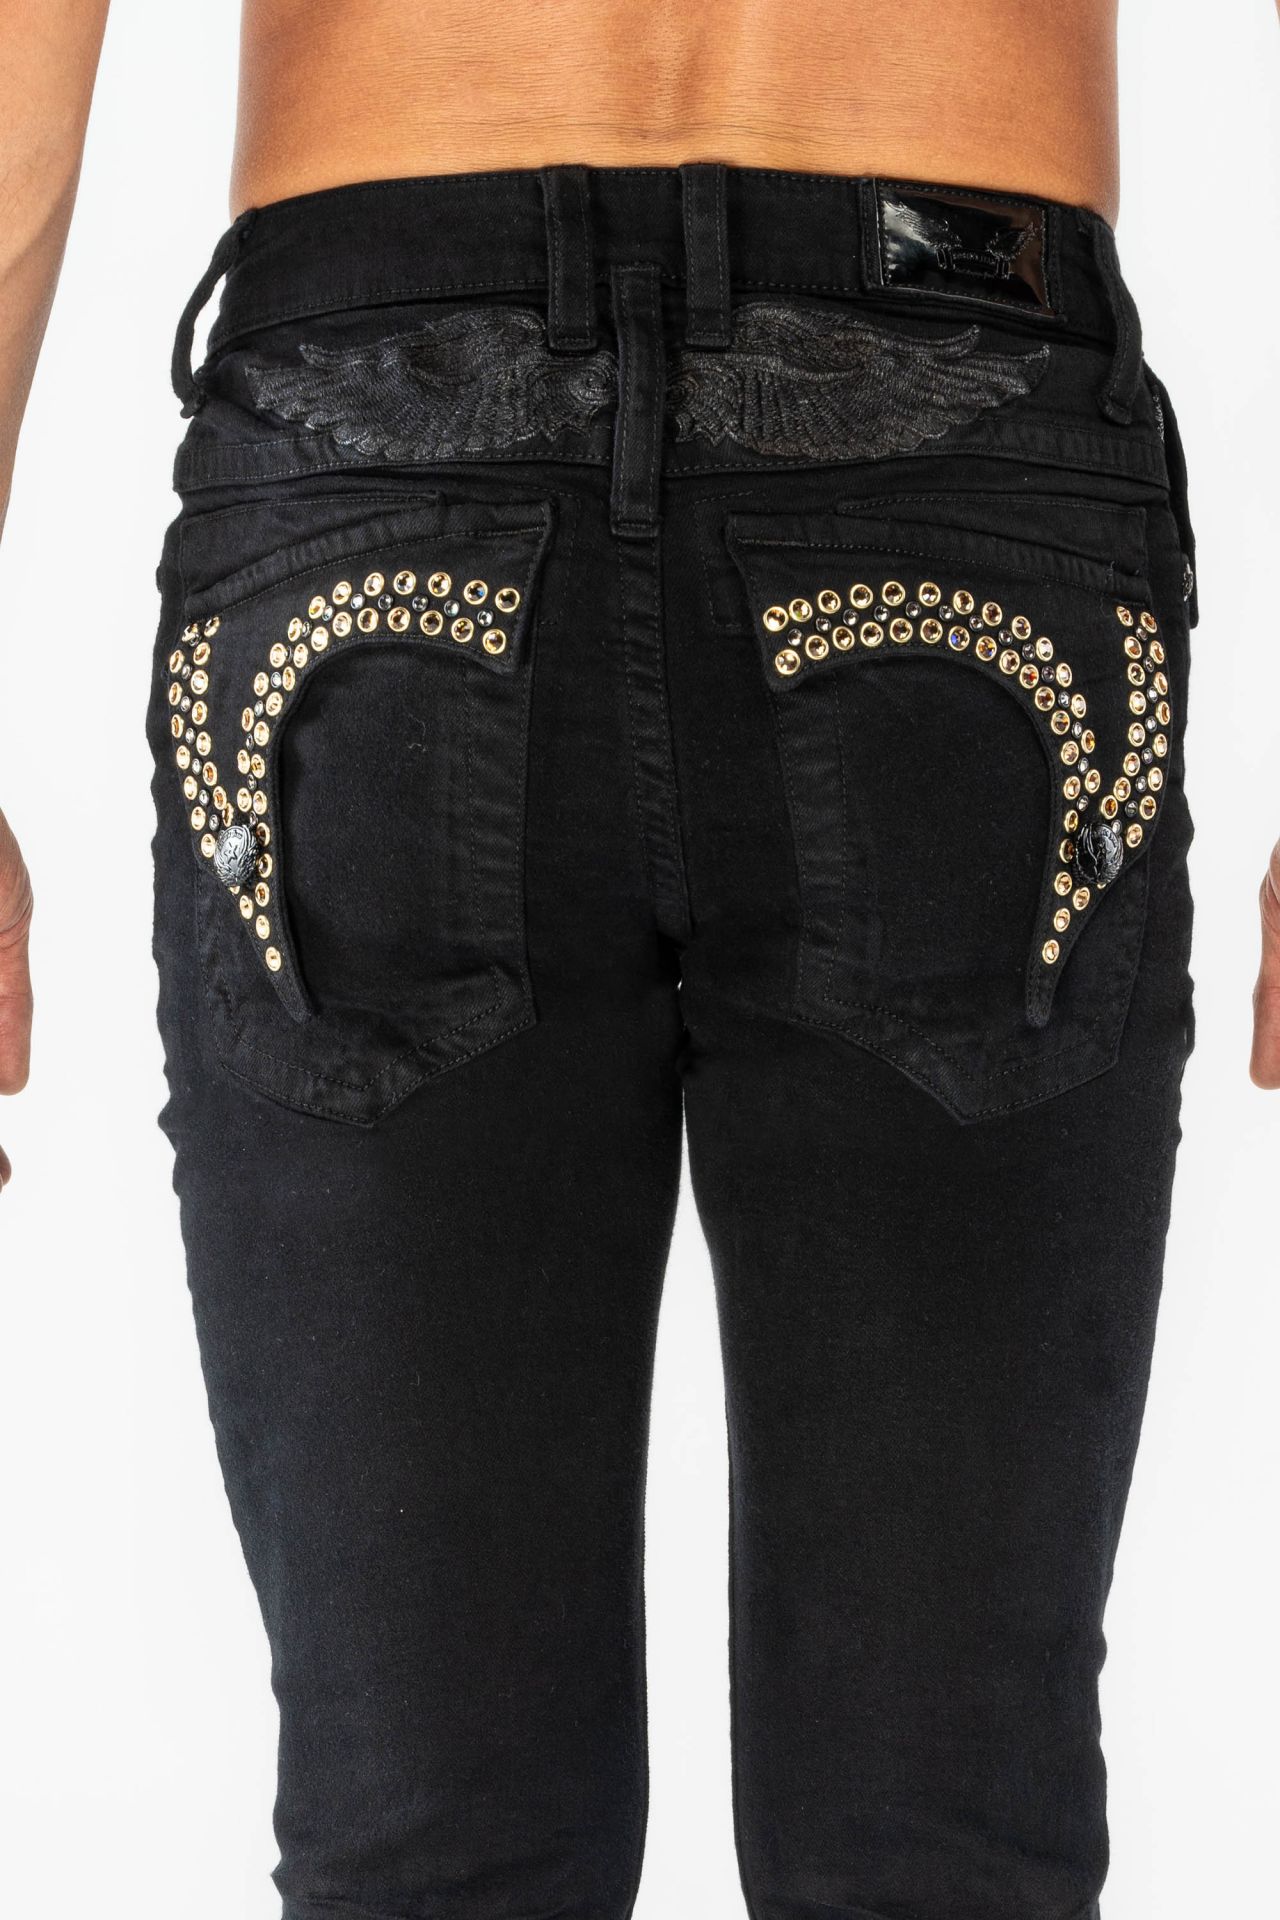 Skinny Black with Crystals Jeans